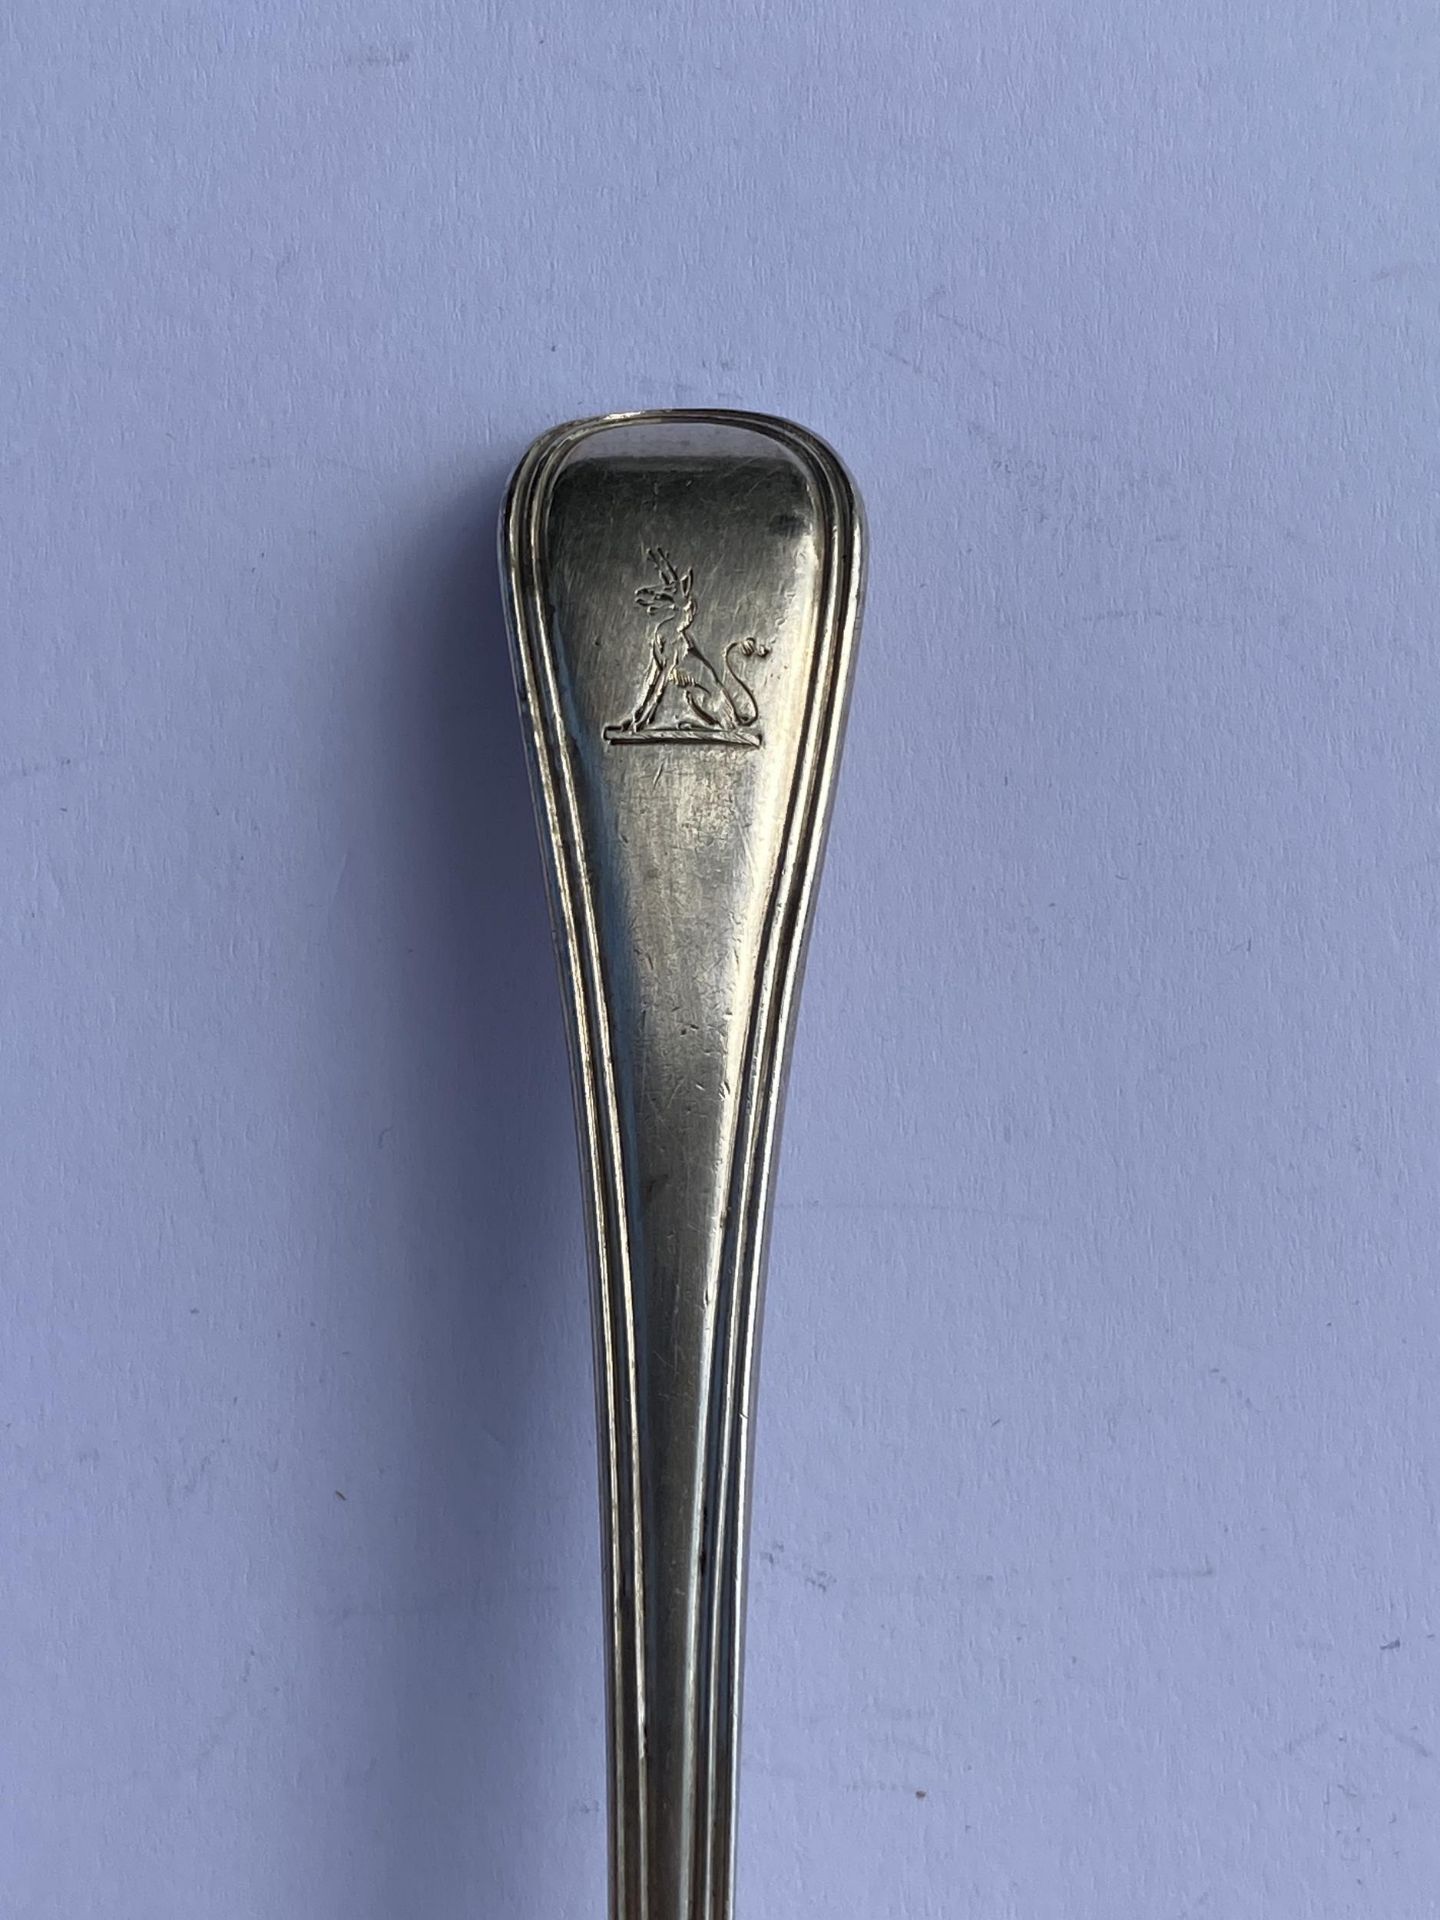 A VICTORIAN 1847 HALLMARKED LONDON SILVER LADLE, MAKER CHAWNER & CO, LENGTH 17 CM, WEIGHT 70 GRAMS - Image 2 of 4